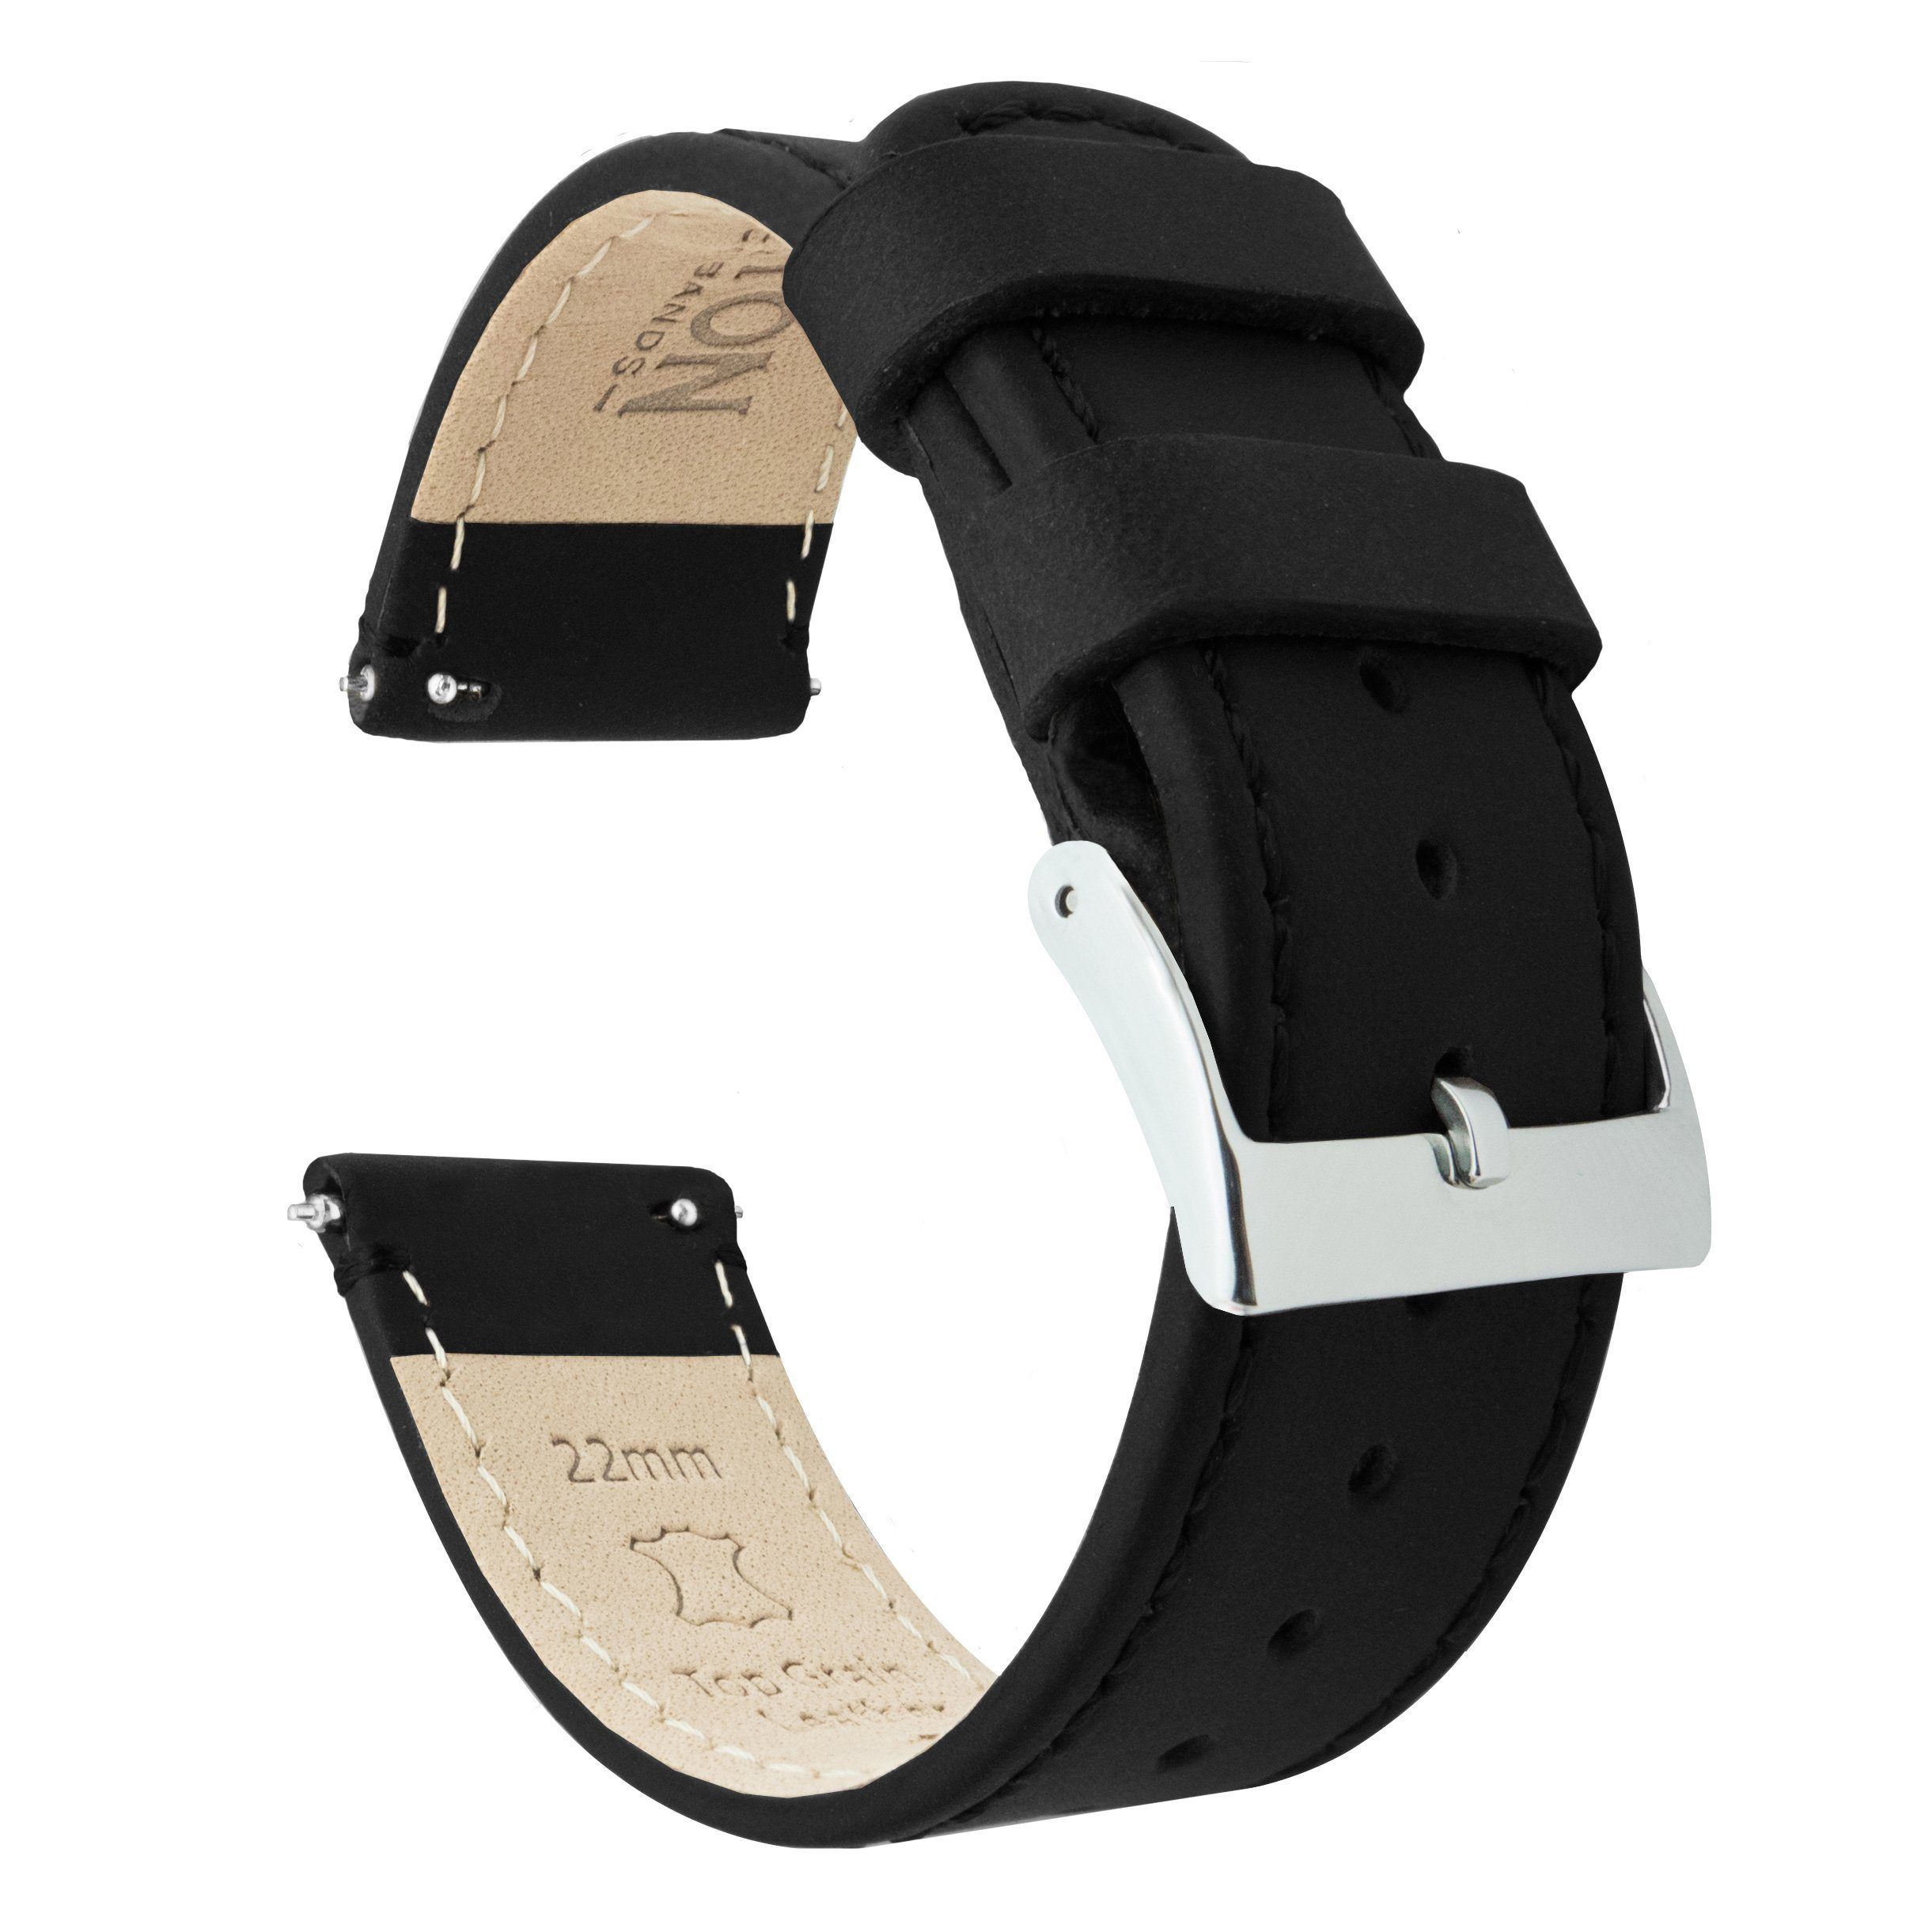 moto 360 2nd gen leather band